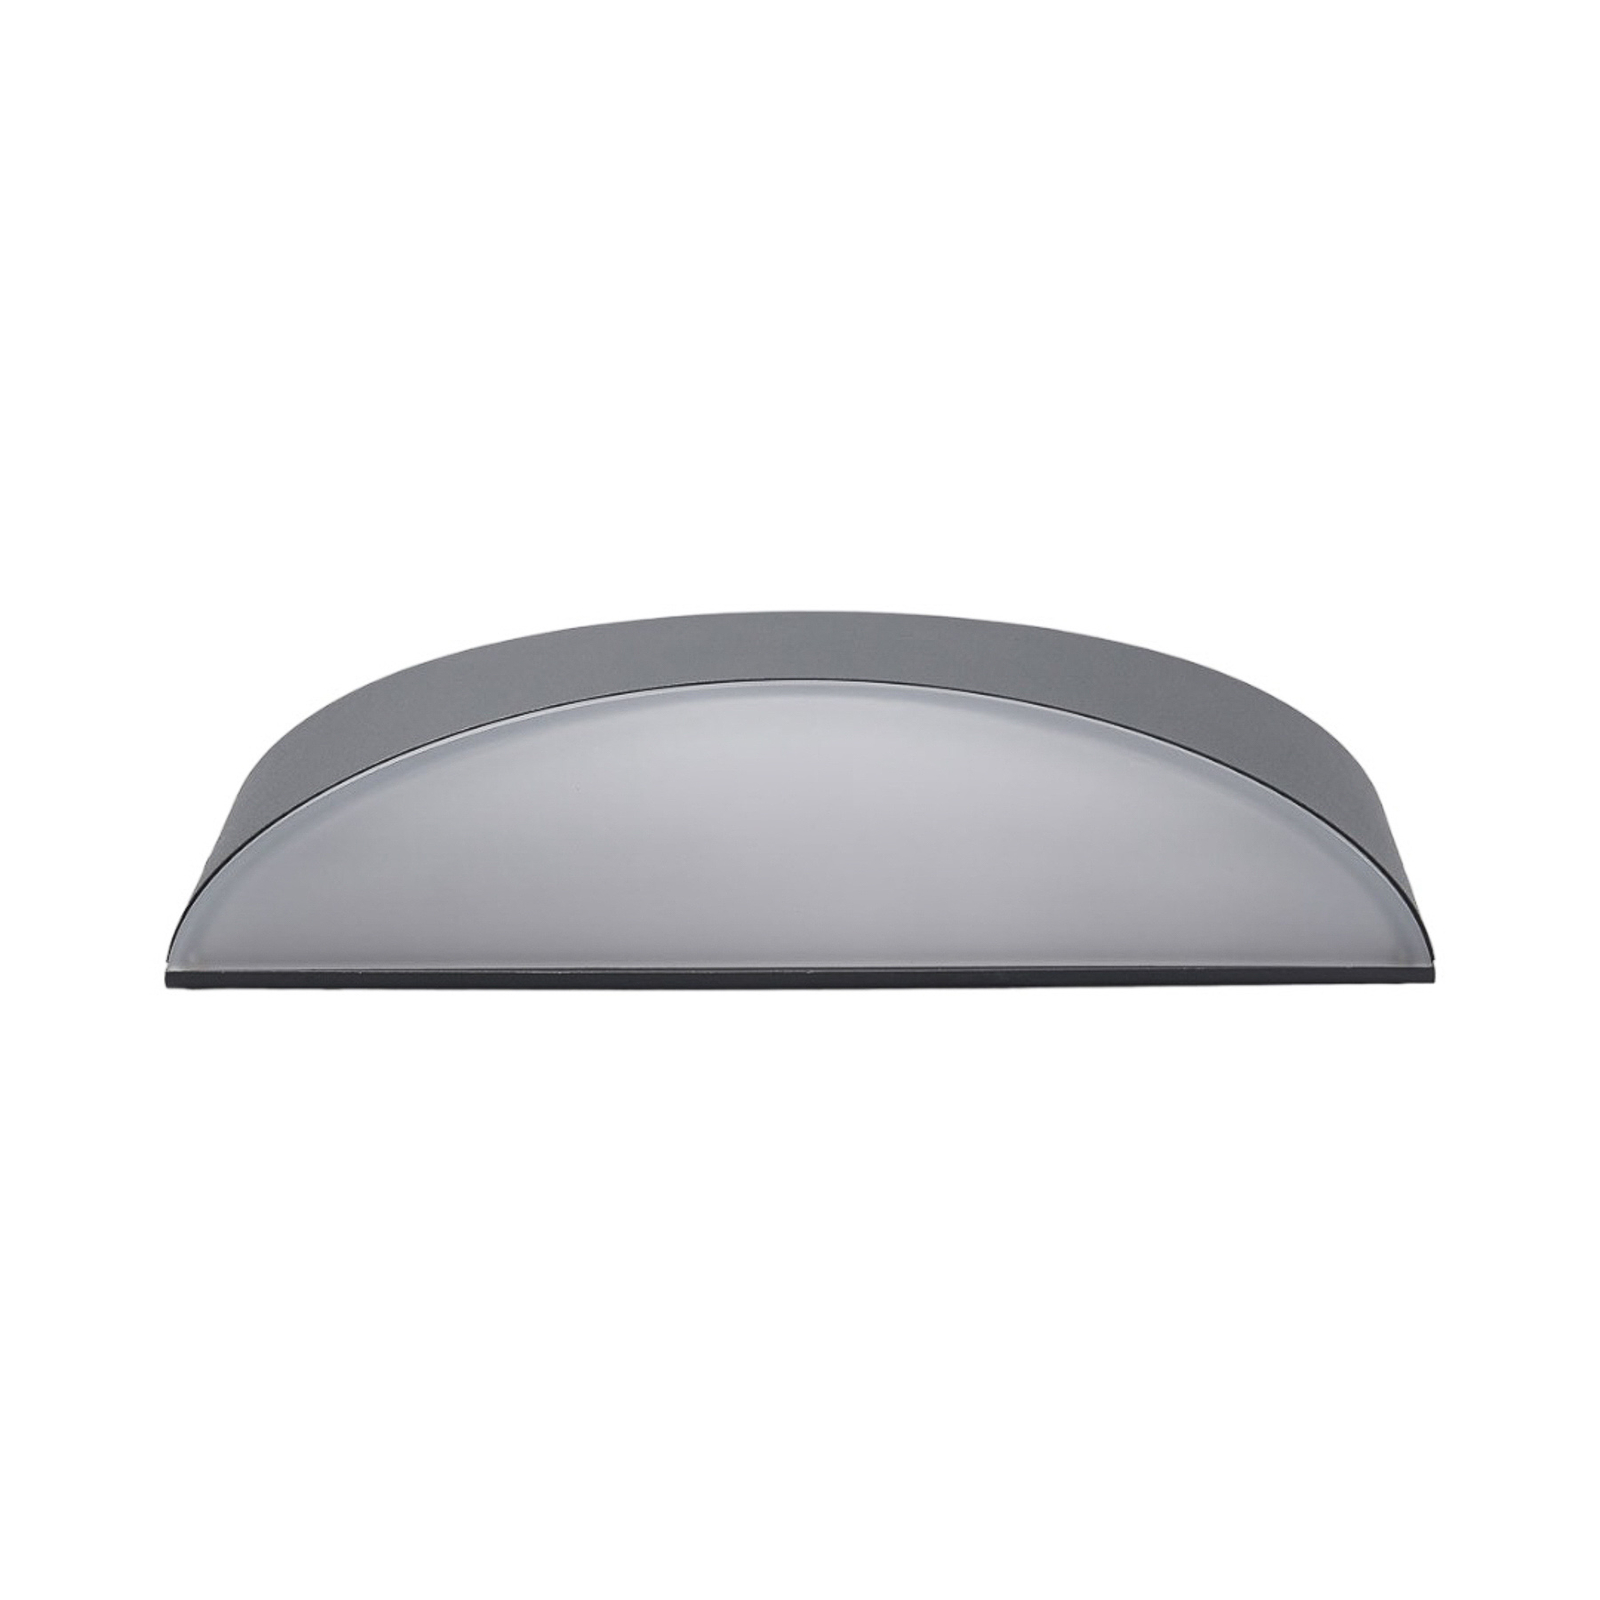 Anthracite-coloured LED outdoor wall light Akira